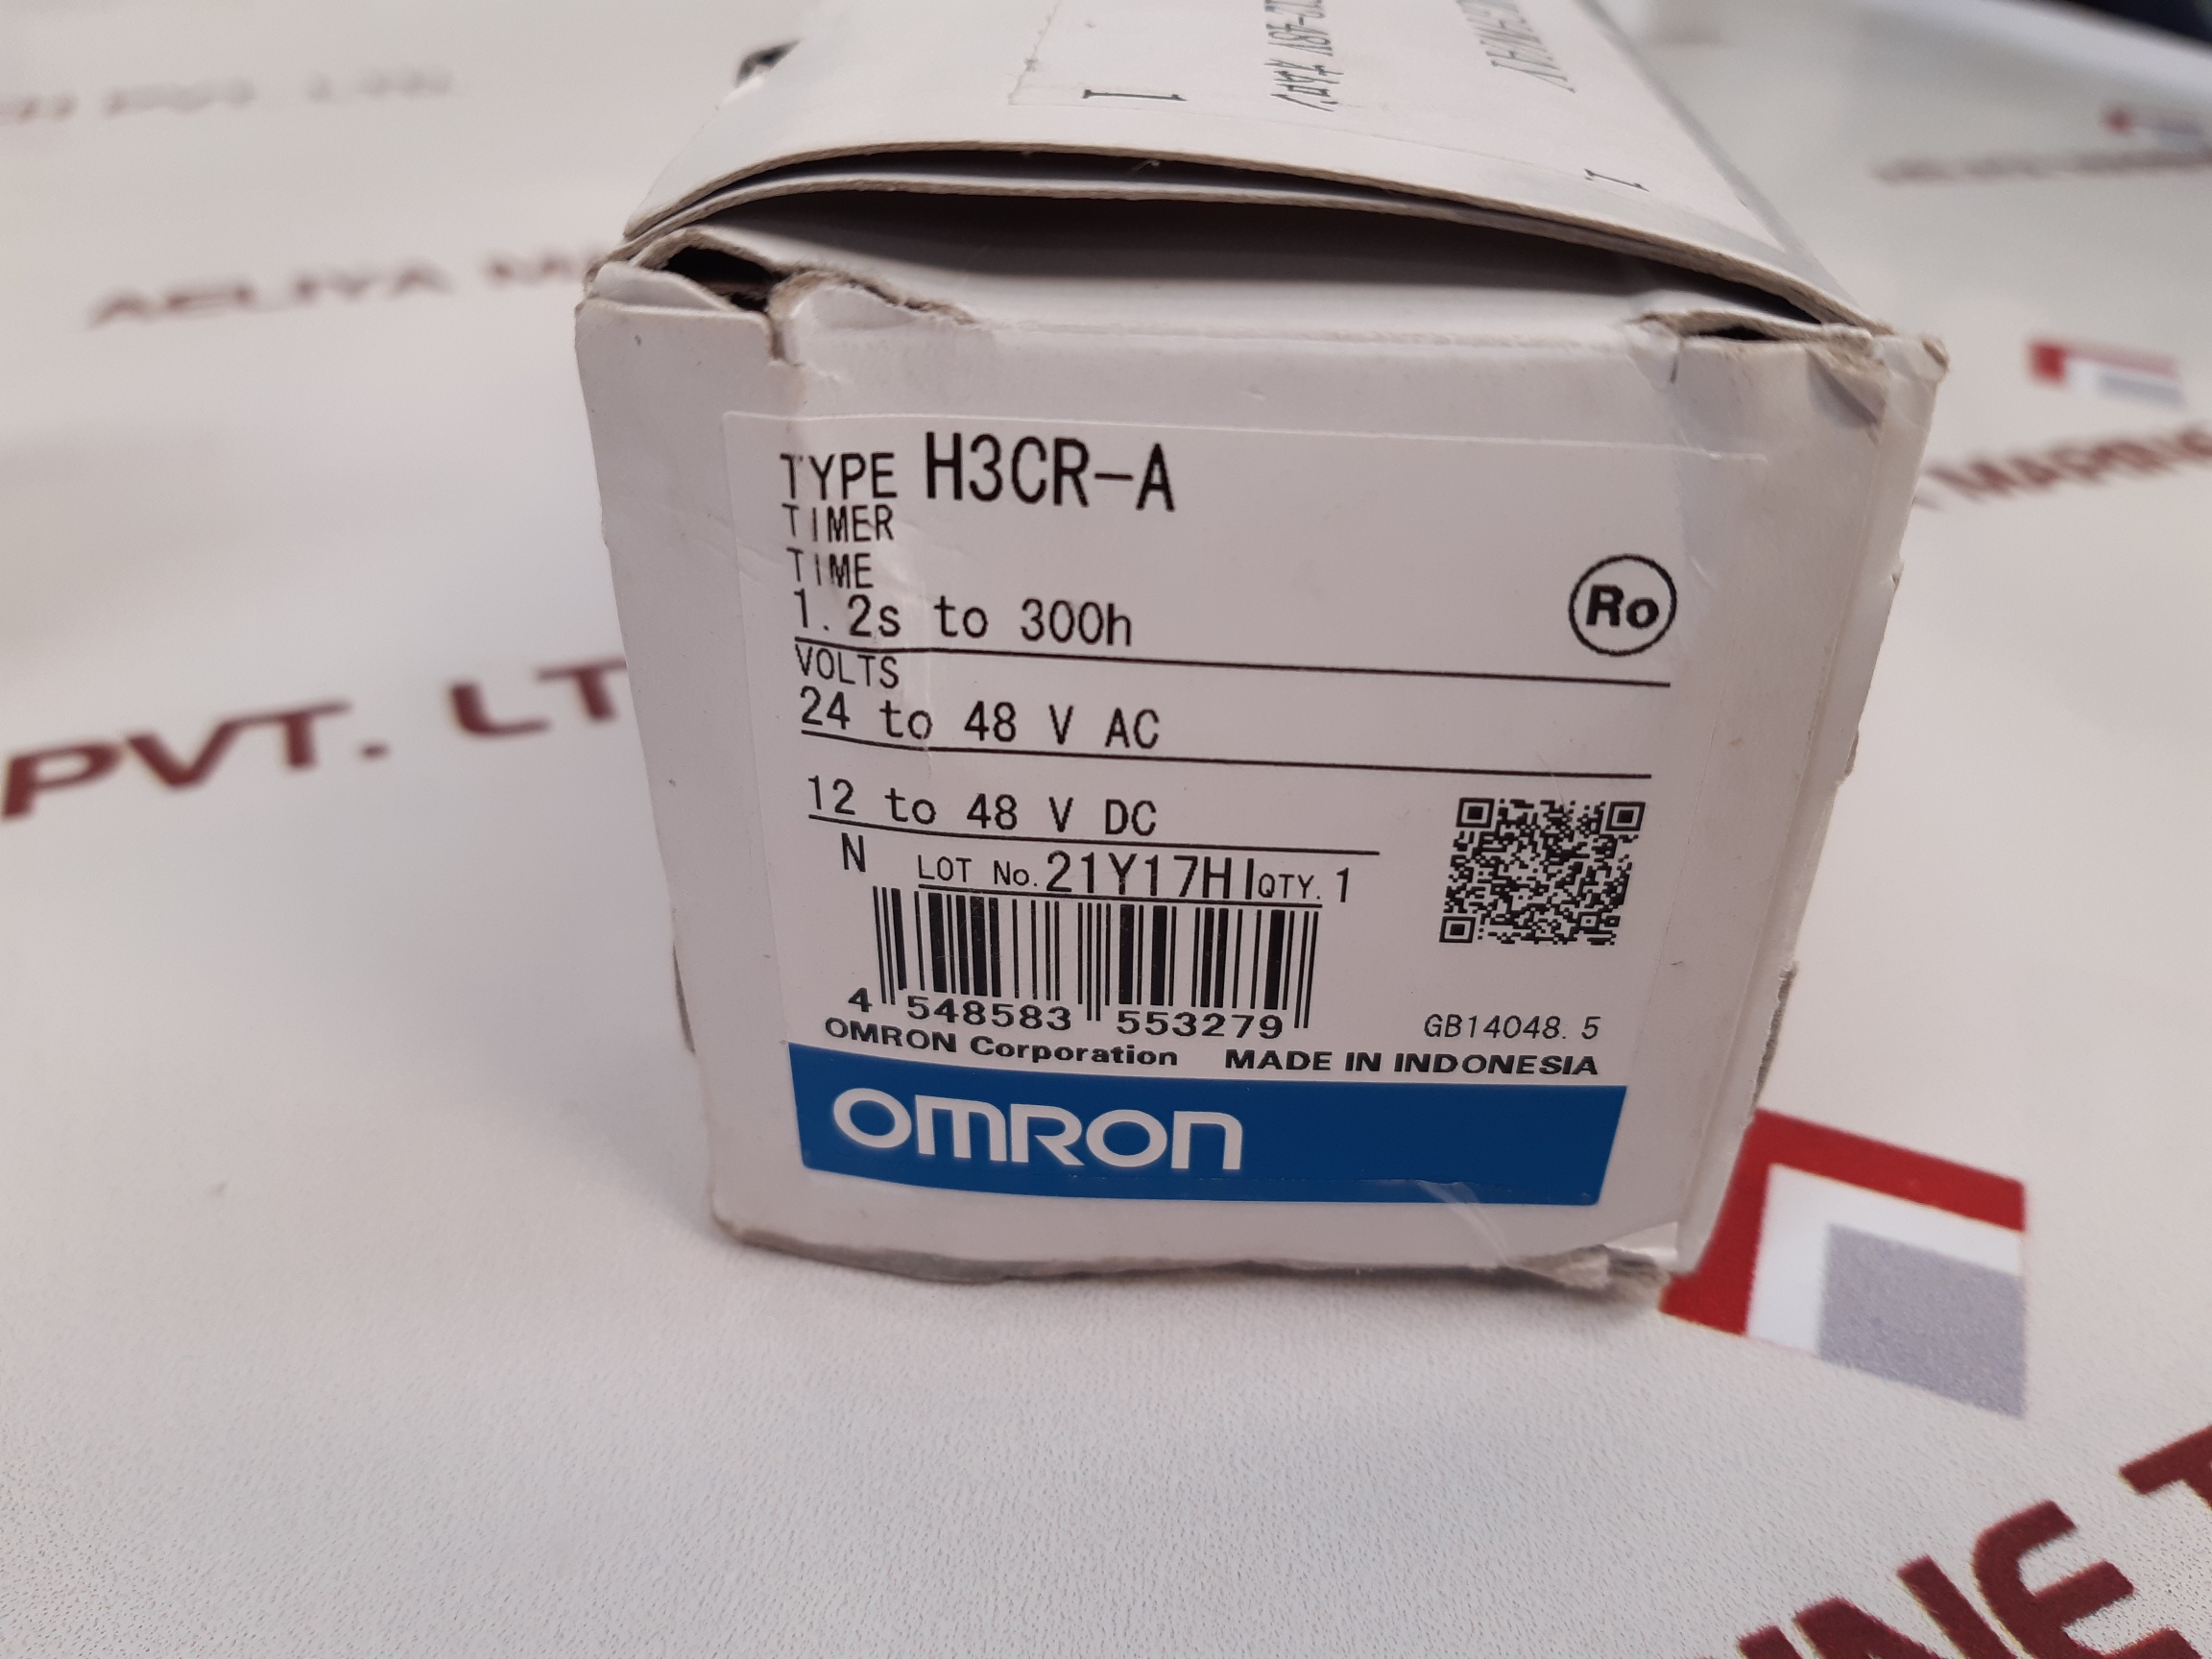 OMRON H3CR-A SOLID-STATE TIMER 1.2S TO 300H